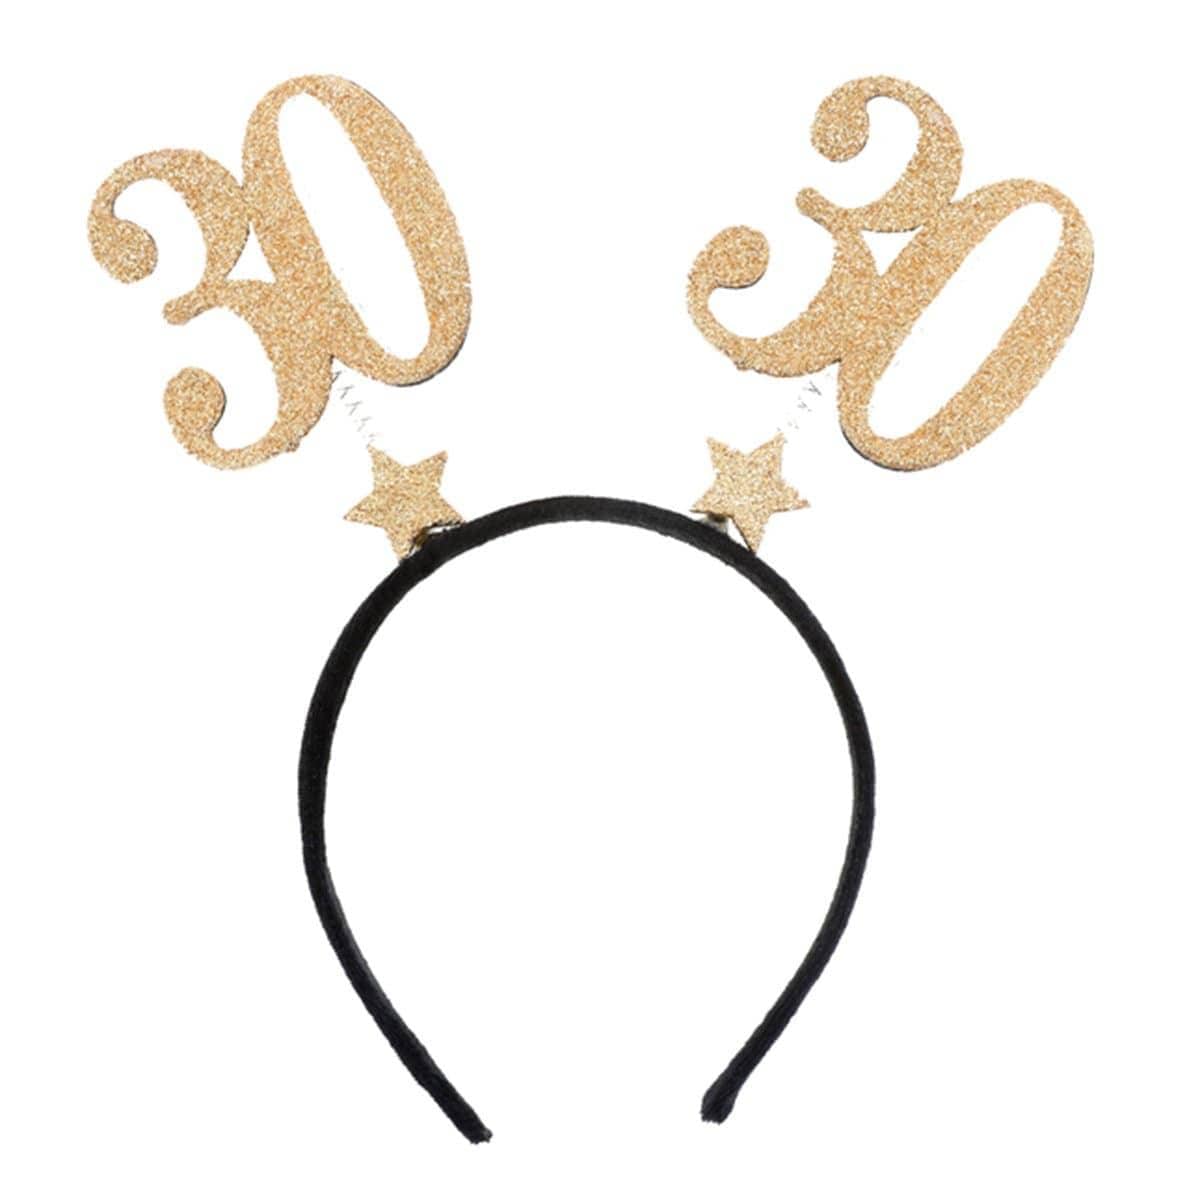 Buy Age Specific Birthday 30 Glitter Headband sold at Party Expert